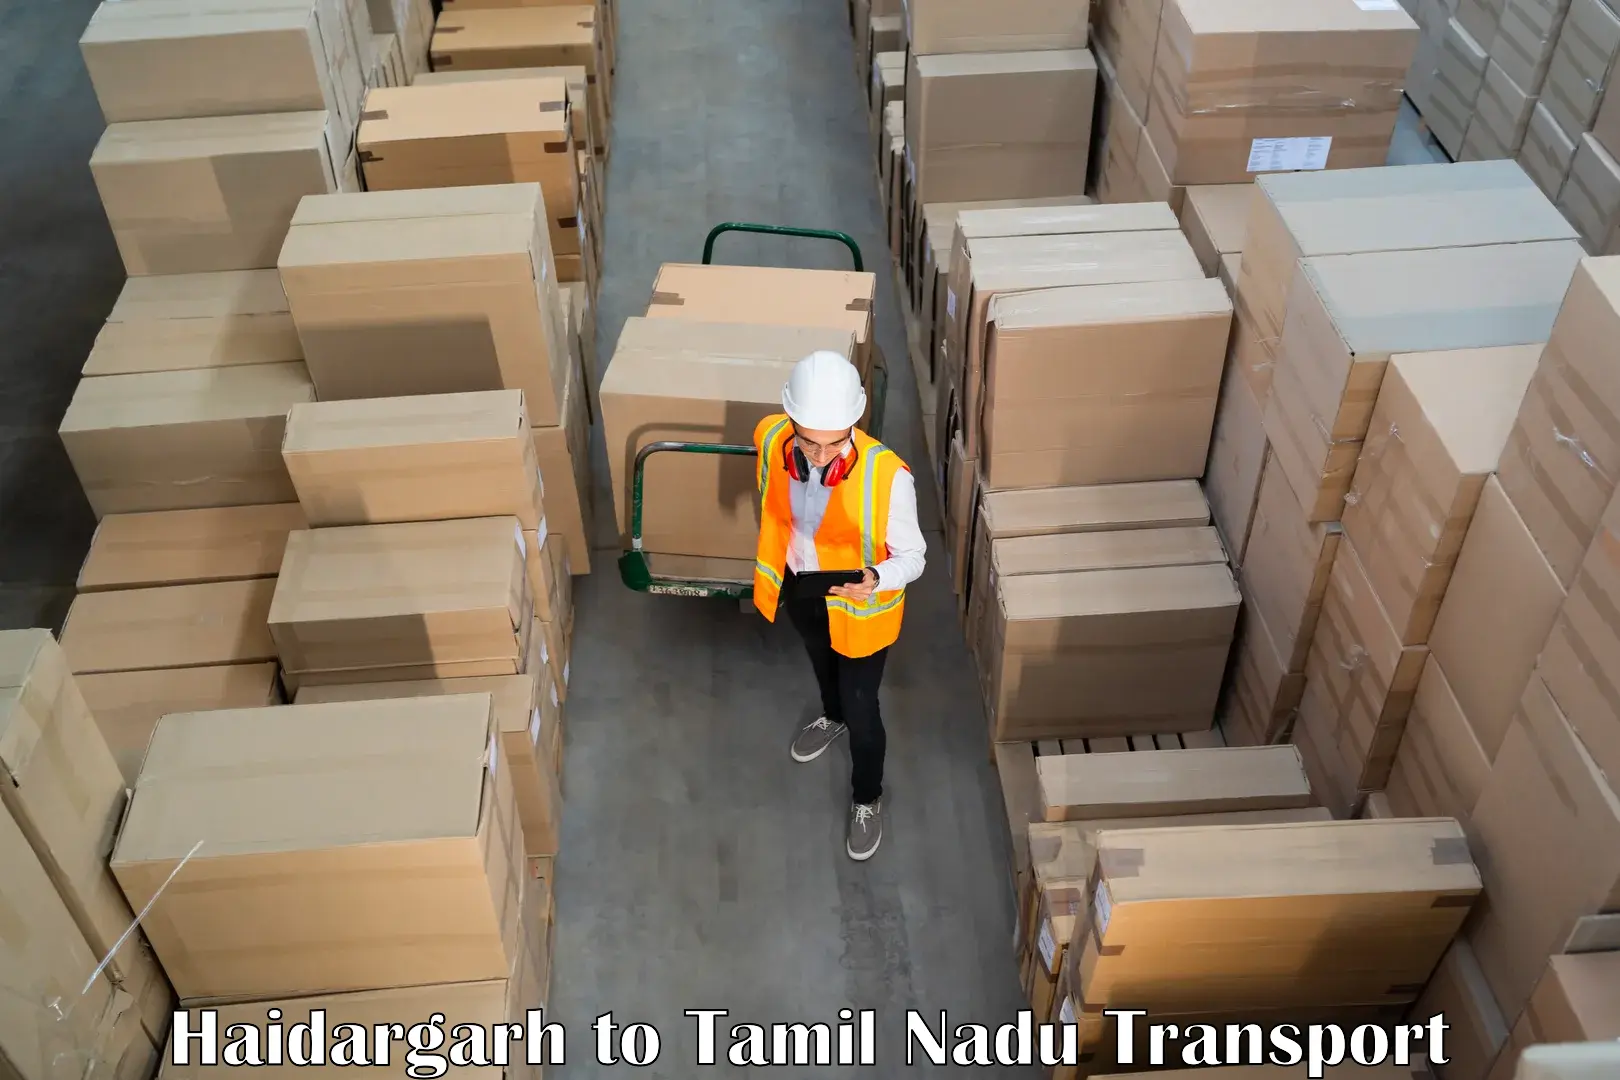 Part load transport service in India Haidargarh to Vellore